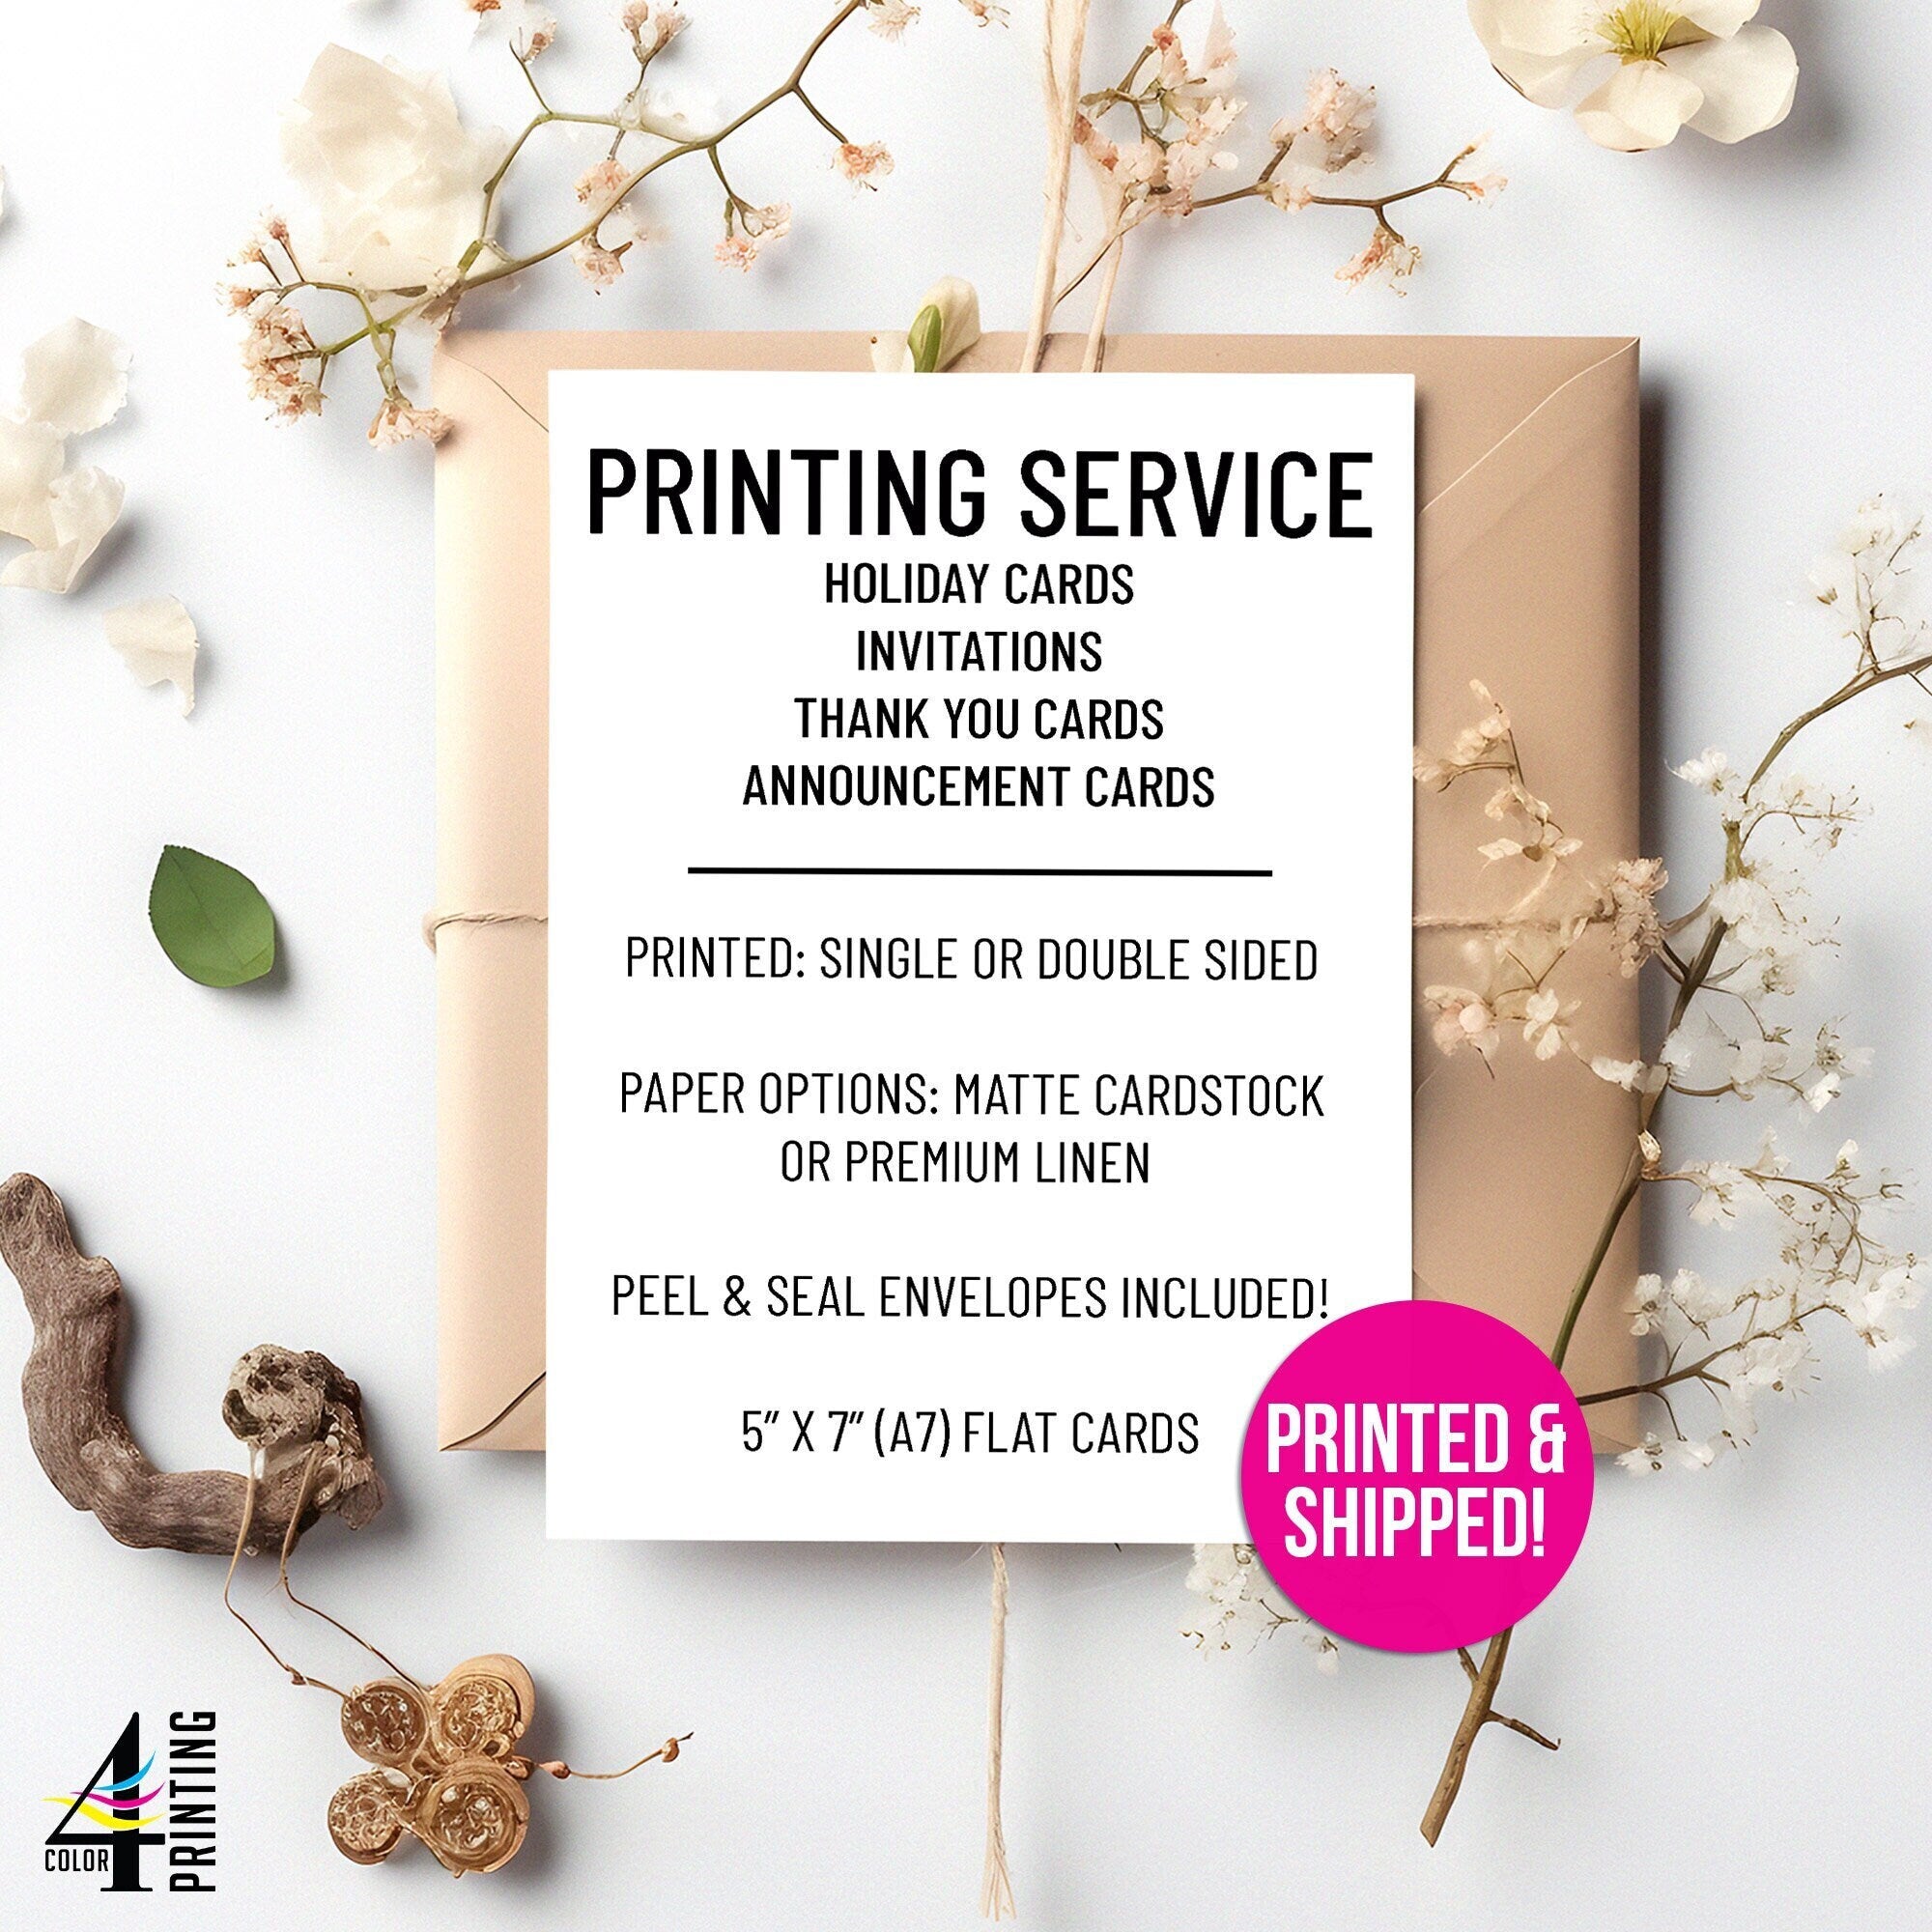 Printing Services for 5x7 Cards